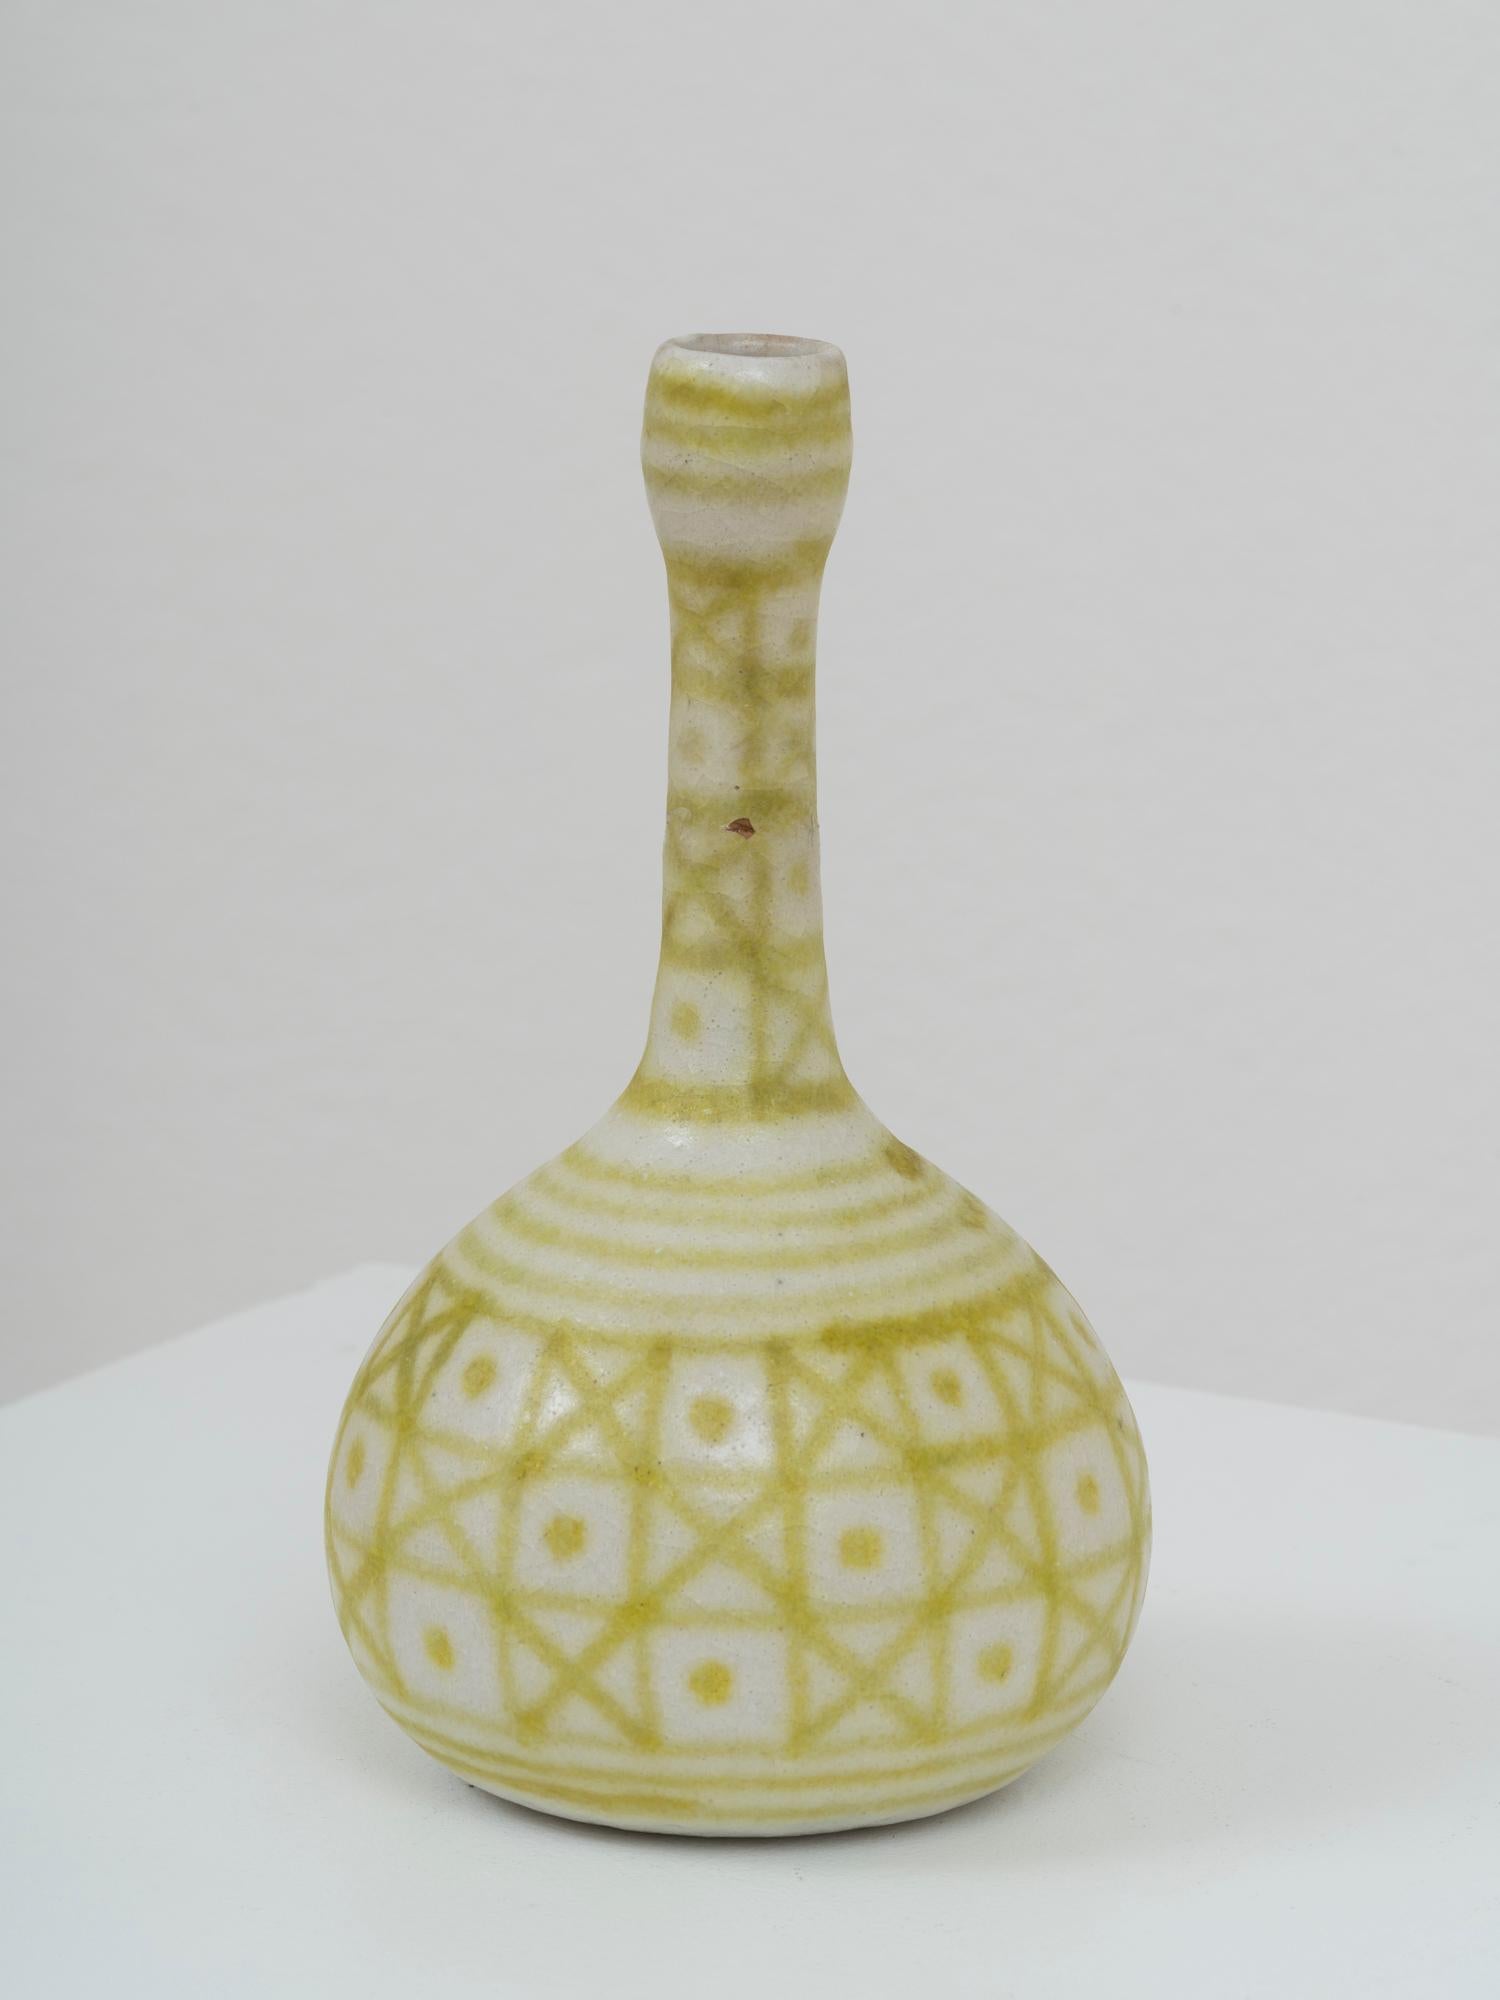 Iconic vase by Italian ceramic master Guido Gambone, from his period at La Tirrena manufacture, active between 1950 and 1967. It is signed with his surname and the iconic donkey mark at the bottom. This vase features a striking geometric decor in a